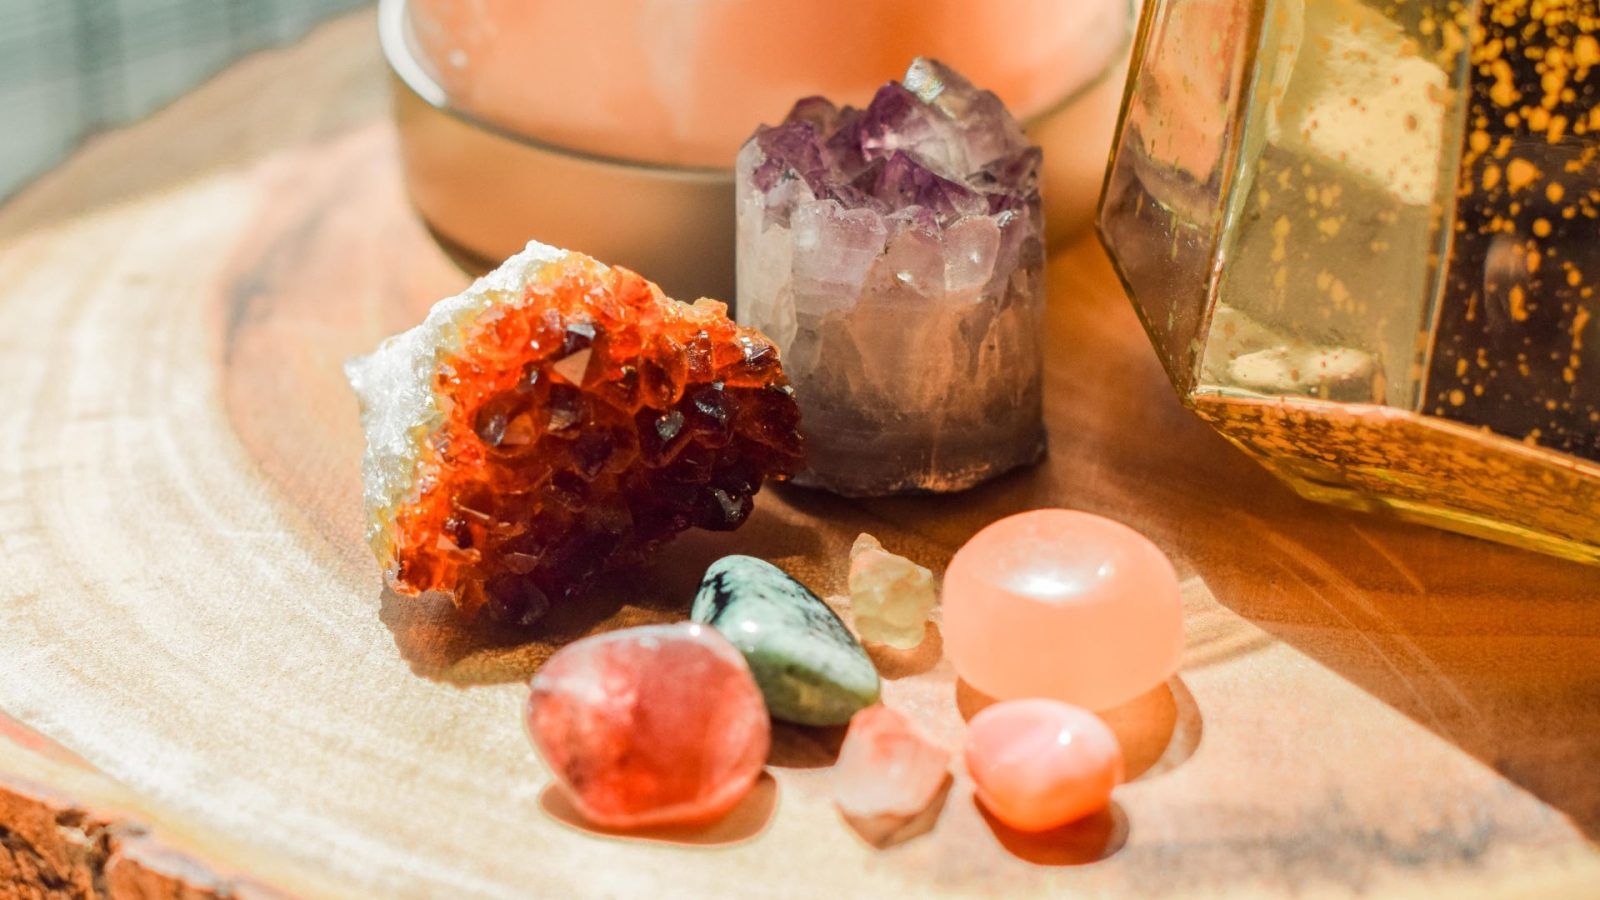 ET reviews 6 Gemstones believed to bring positive energy to